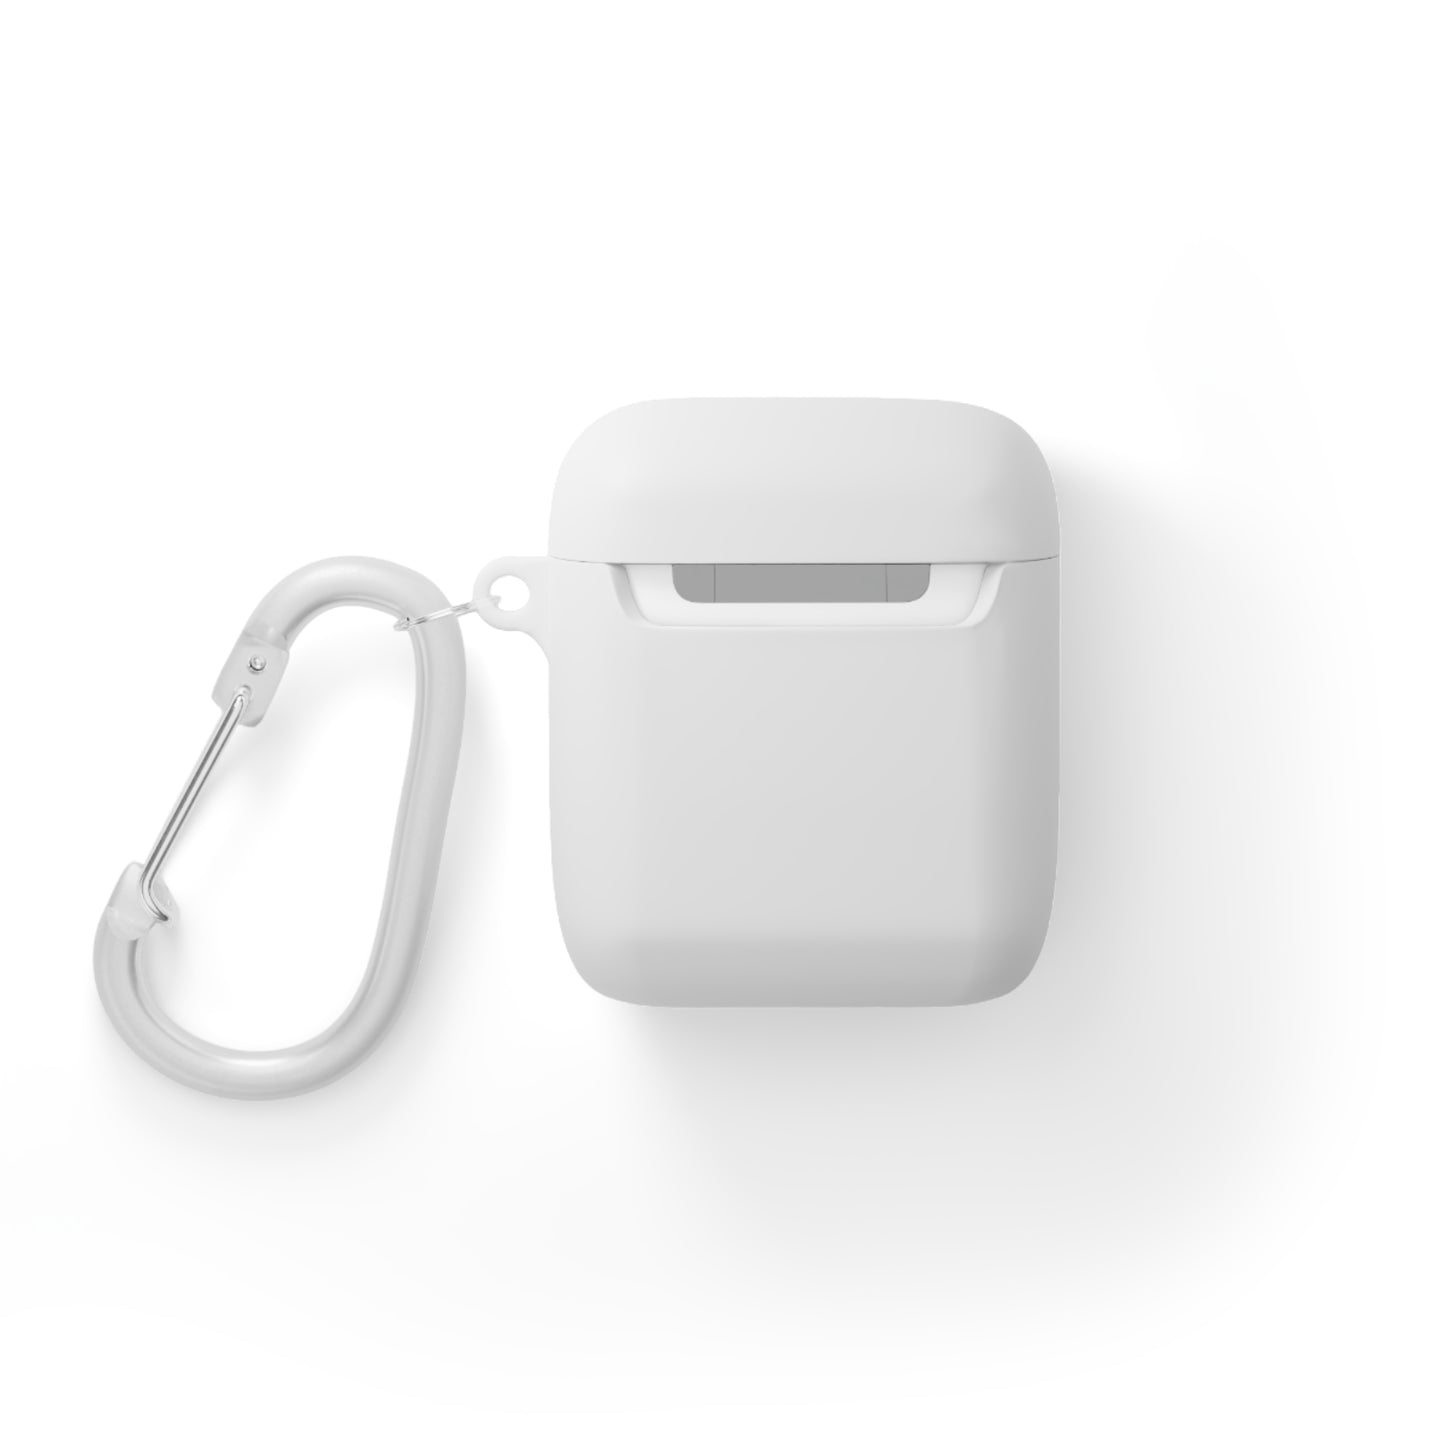 Tsalack Express AirPods and AirPods Pro Case Cover